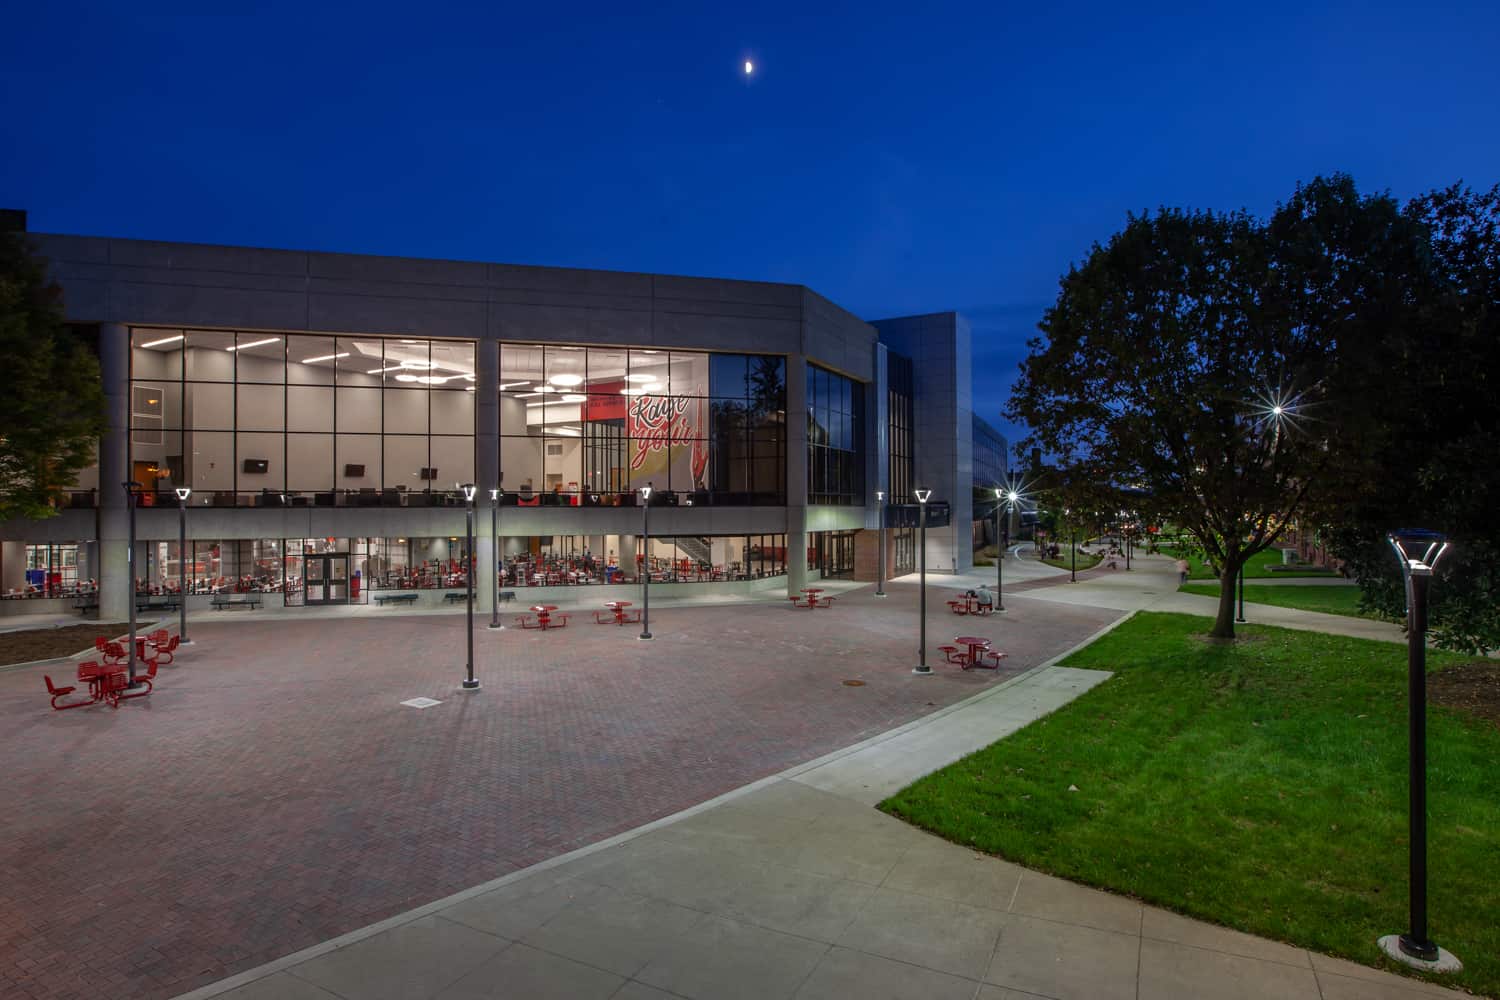 Student Activities Center Renovation and Expansion - Hastings+Chivetta  Architects